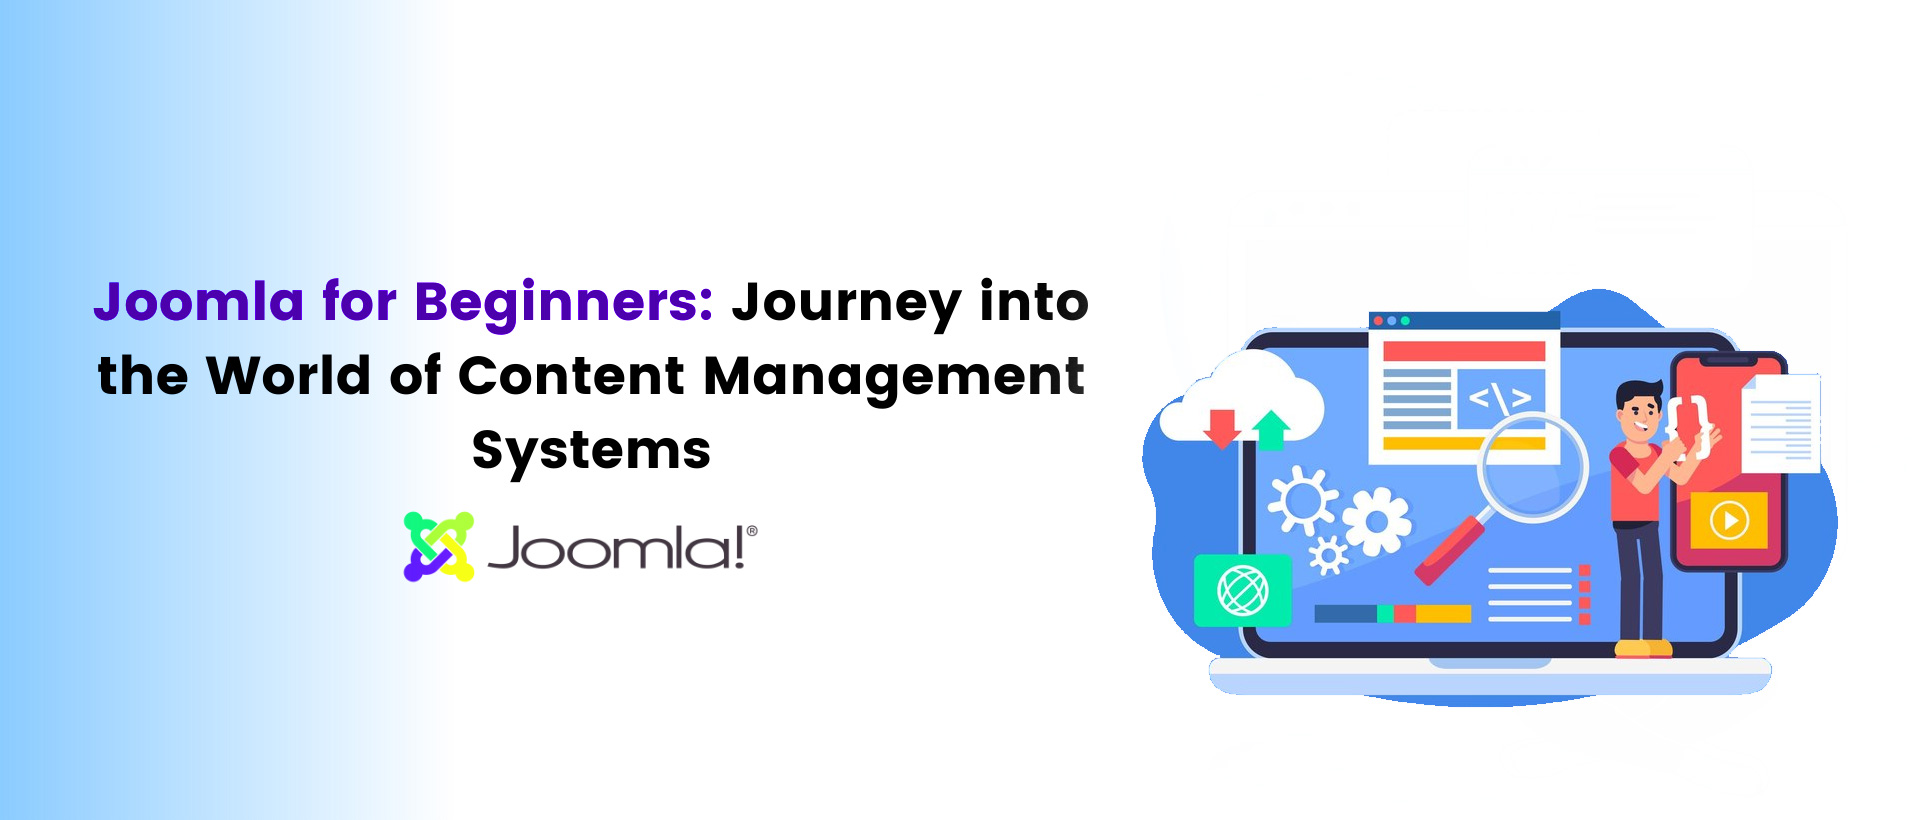 Joomla for Beginners: Journey into the World of Content Management Systems